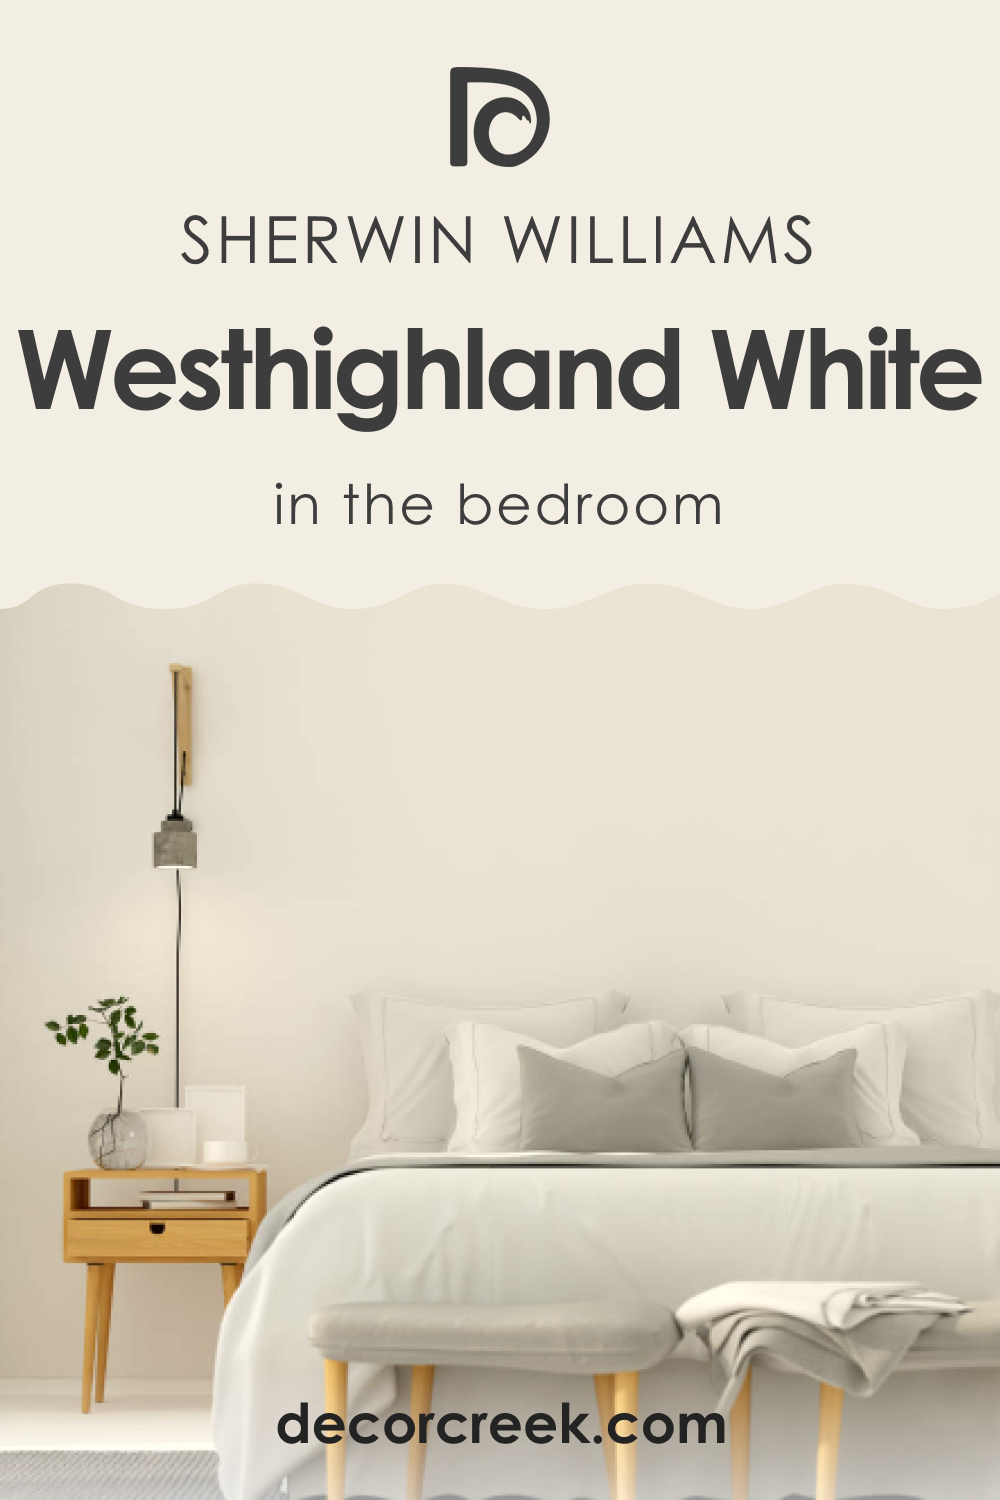 How to Use SW 7566 Westhighland White in the Bedroom?